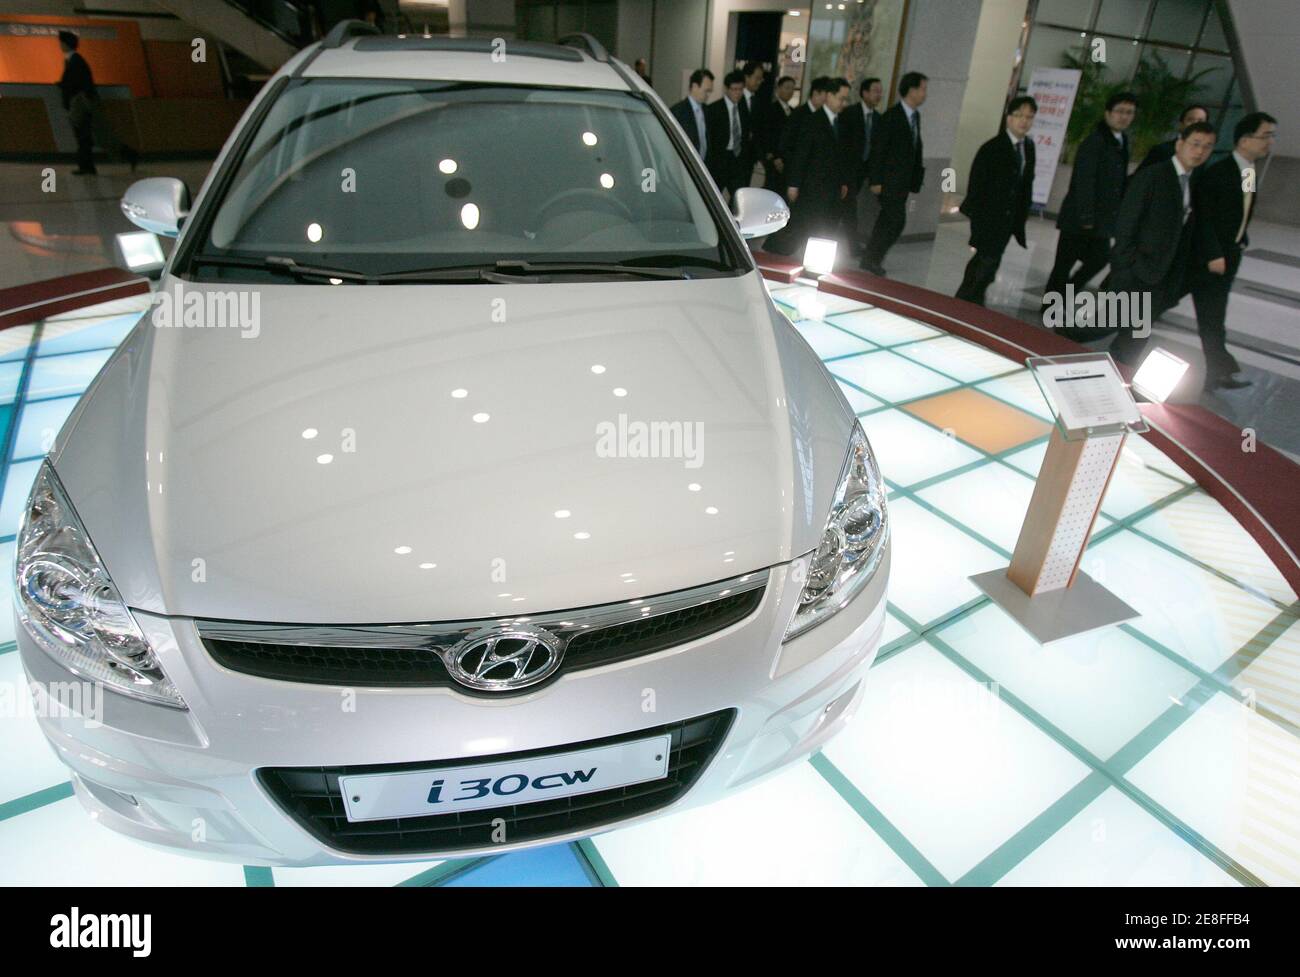 Employees of Hyundai Motor walk past its car I30 CW displayed on a lobby at the company headquarters in Seoul January 2, 2009. South Korean automakers' combined sales in December fell from a year ago, data showed on Friday, adding more concerns over the slowing world's car demand on a global recession and the financial crisis.  REUTERS/Jo Yong-Hak (SOUTH KOREA) Stock Photo